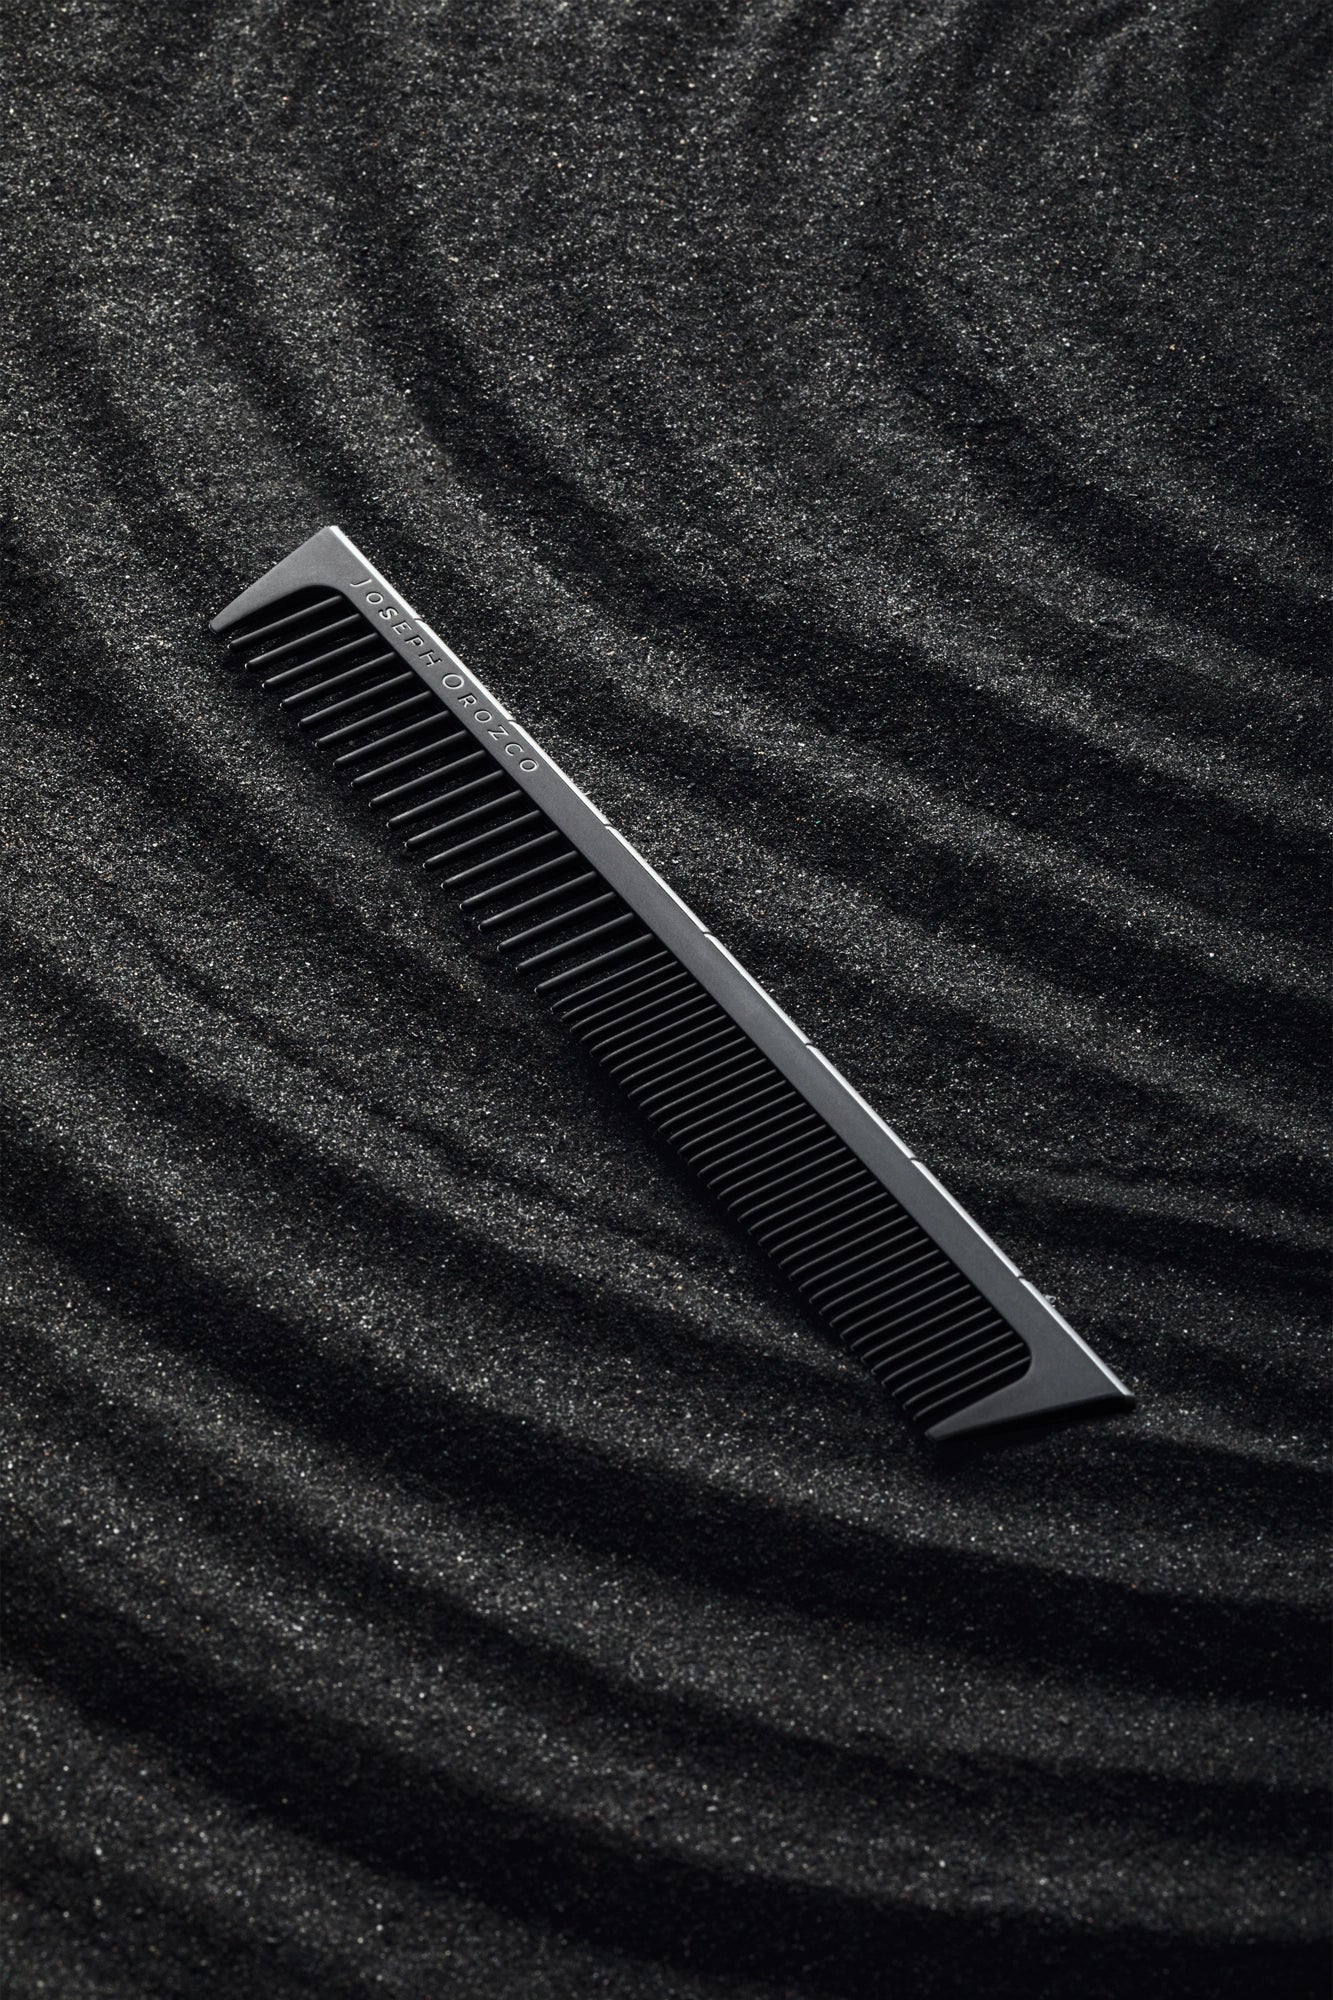 A professional hair comb from Joseph Orozco, designed for styling, rests diagonally on a textured, shimmering black surface that suggests the sleekness and elegance of the styling tools and products by this pro hair brand.